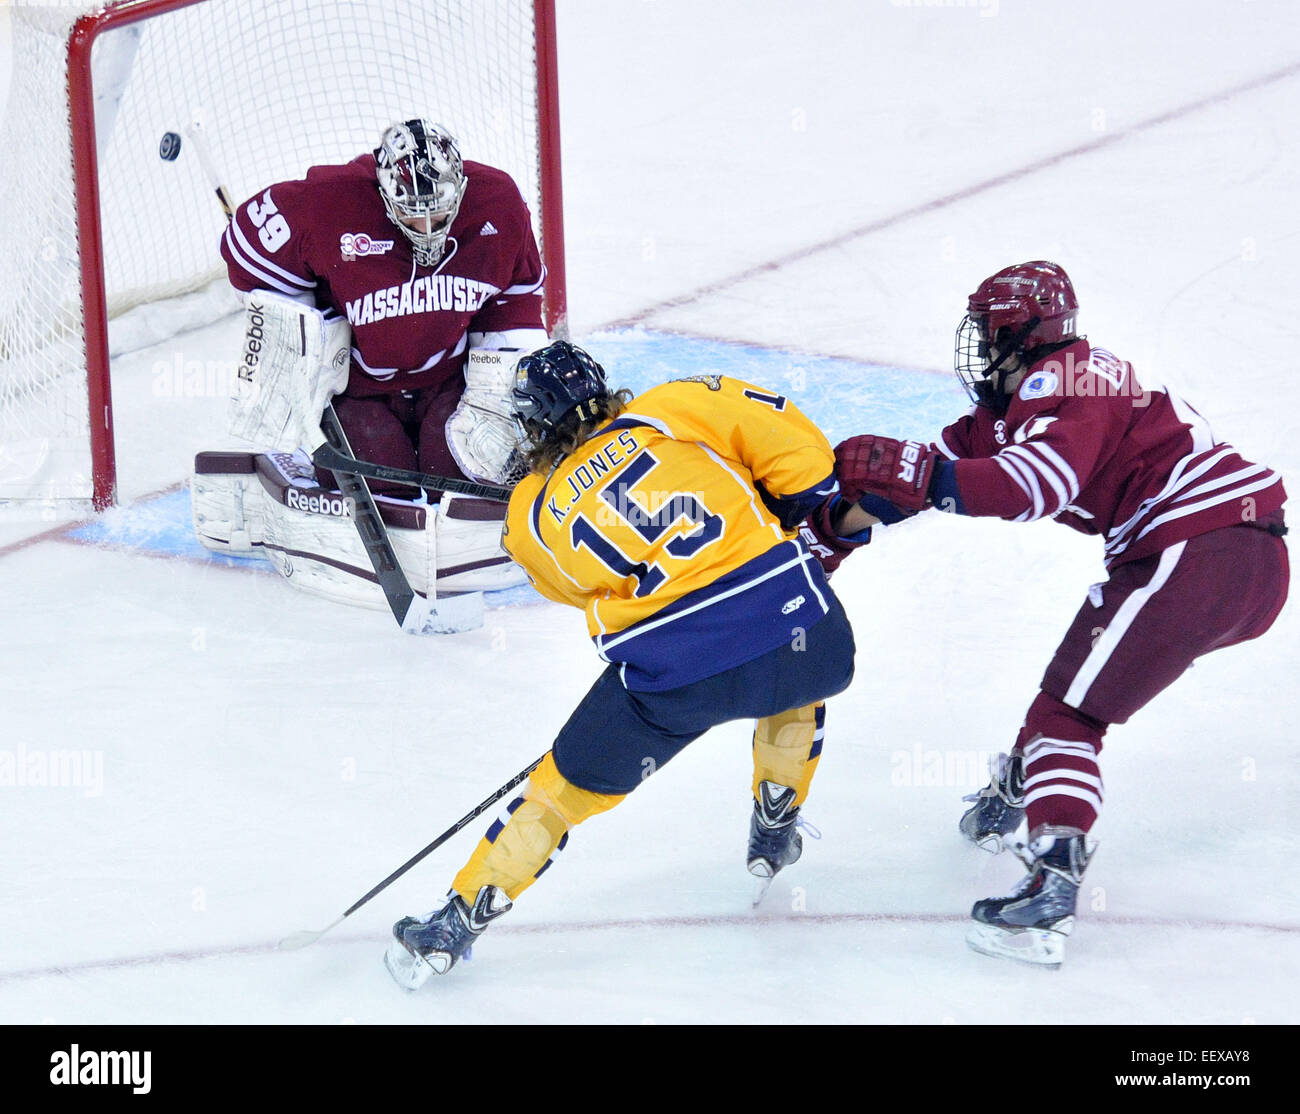 Quinnipiac's Kellen Jones puts the puck in the net past Umass' Steve Masalerrz during the first period. On the right for Providence is Ben Gallagher. Stock Photo